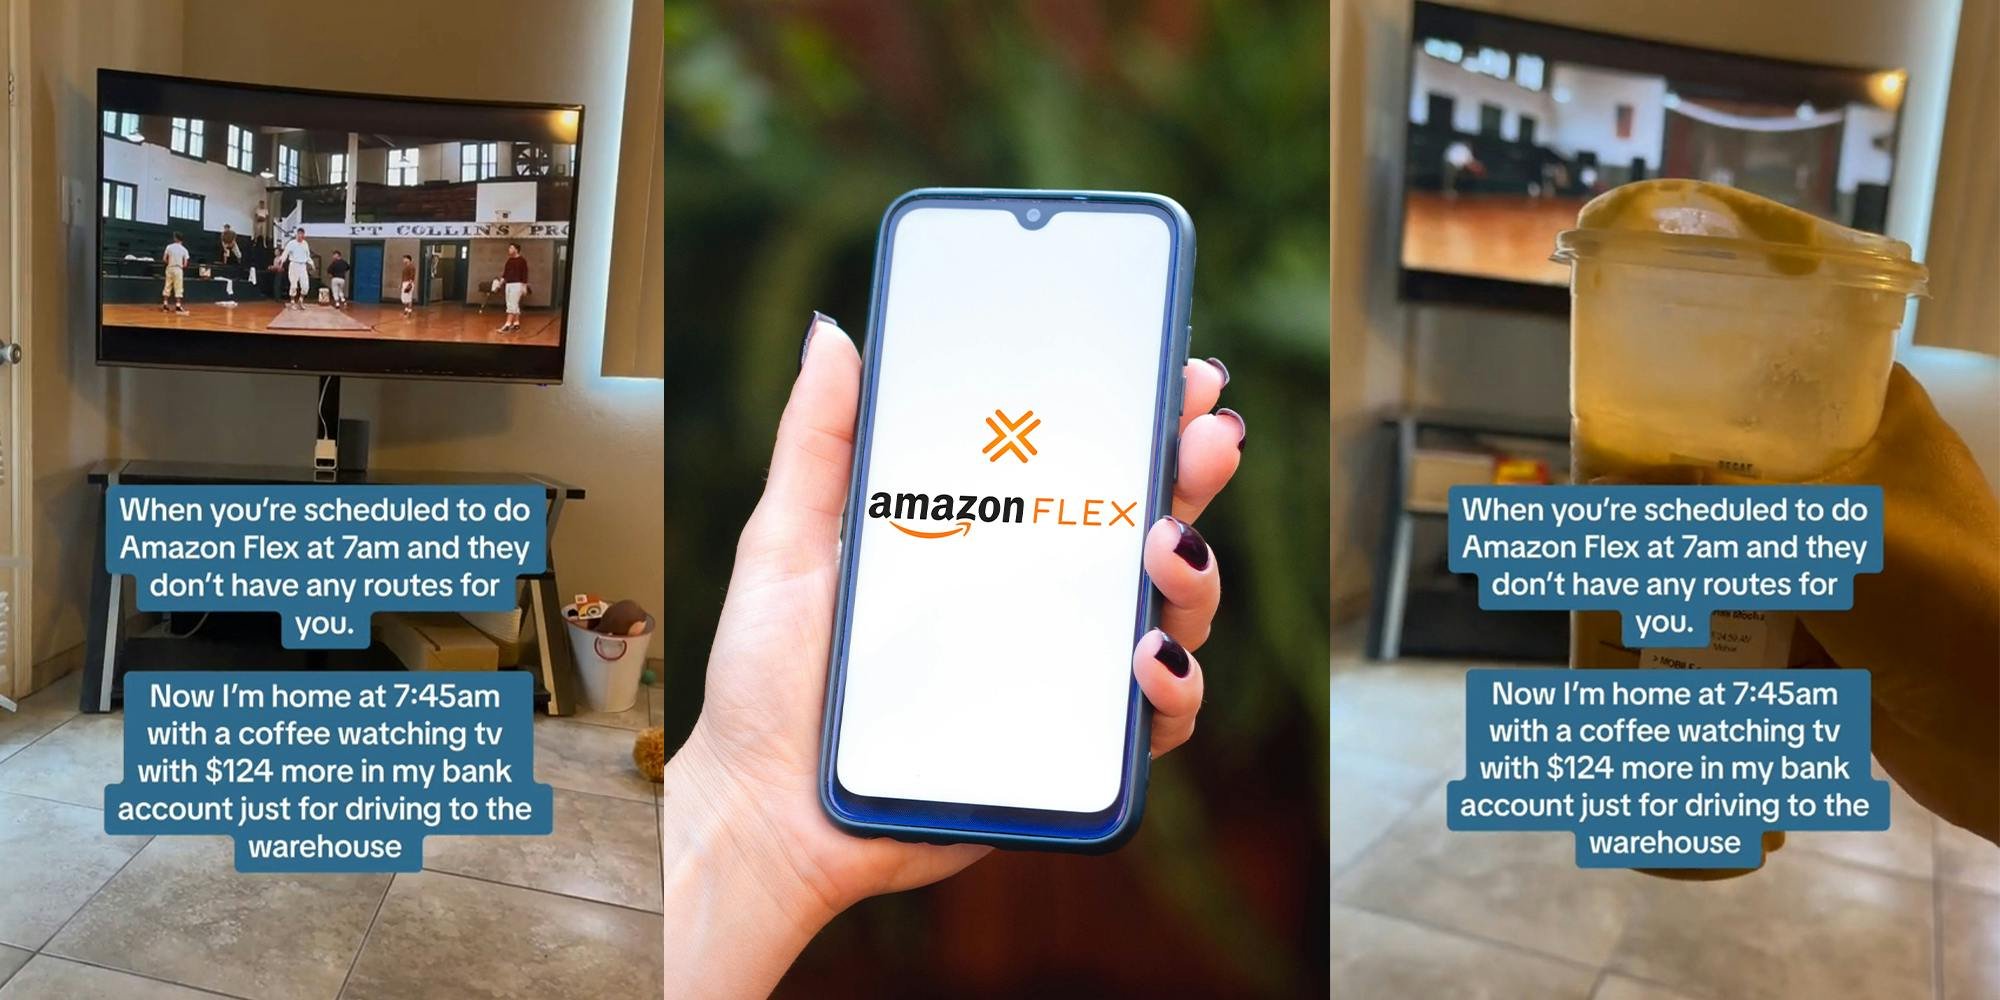 'I'm at home at 7:45am with a coffee watching tv': Amazon Flex worker says she made $124 in less than an hour. Viewers want in